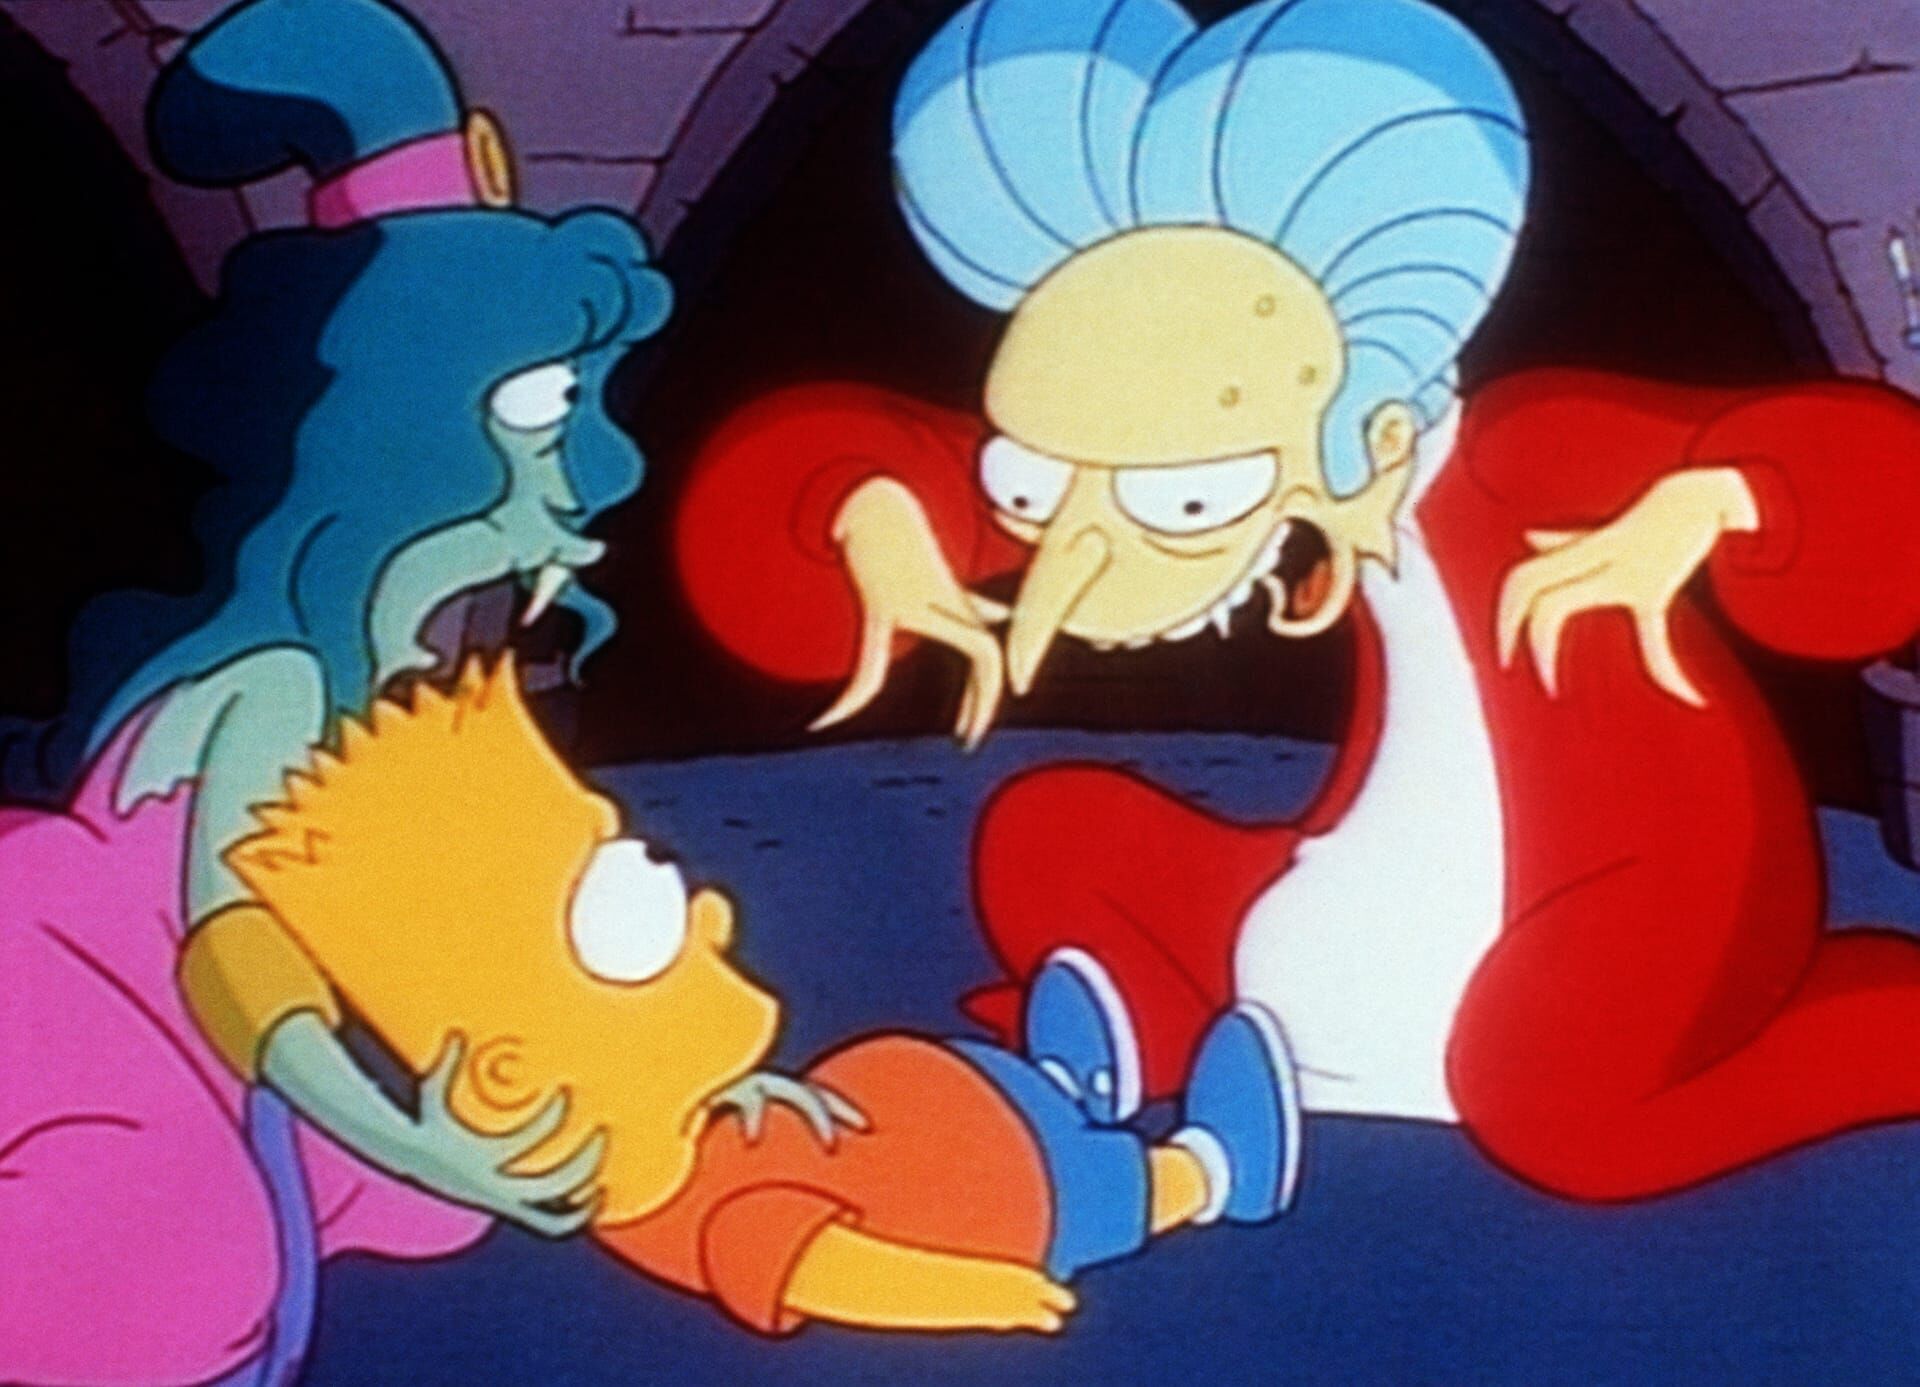 The Simpsons - Treehouse of Horror IV